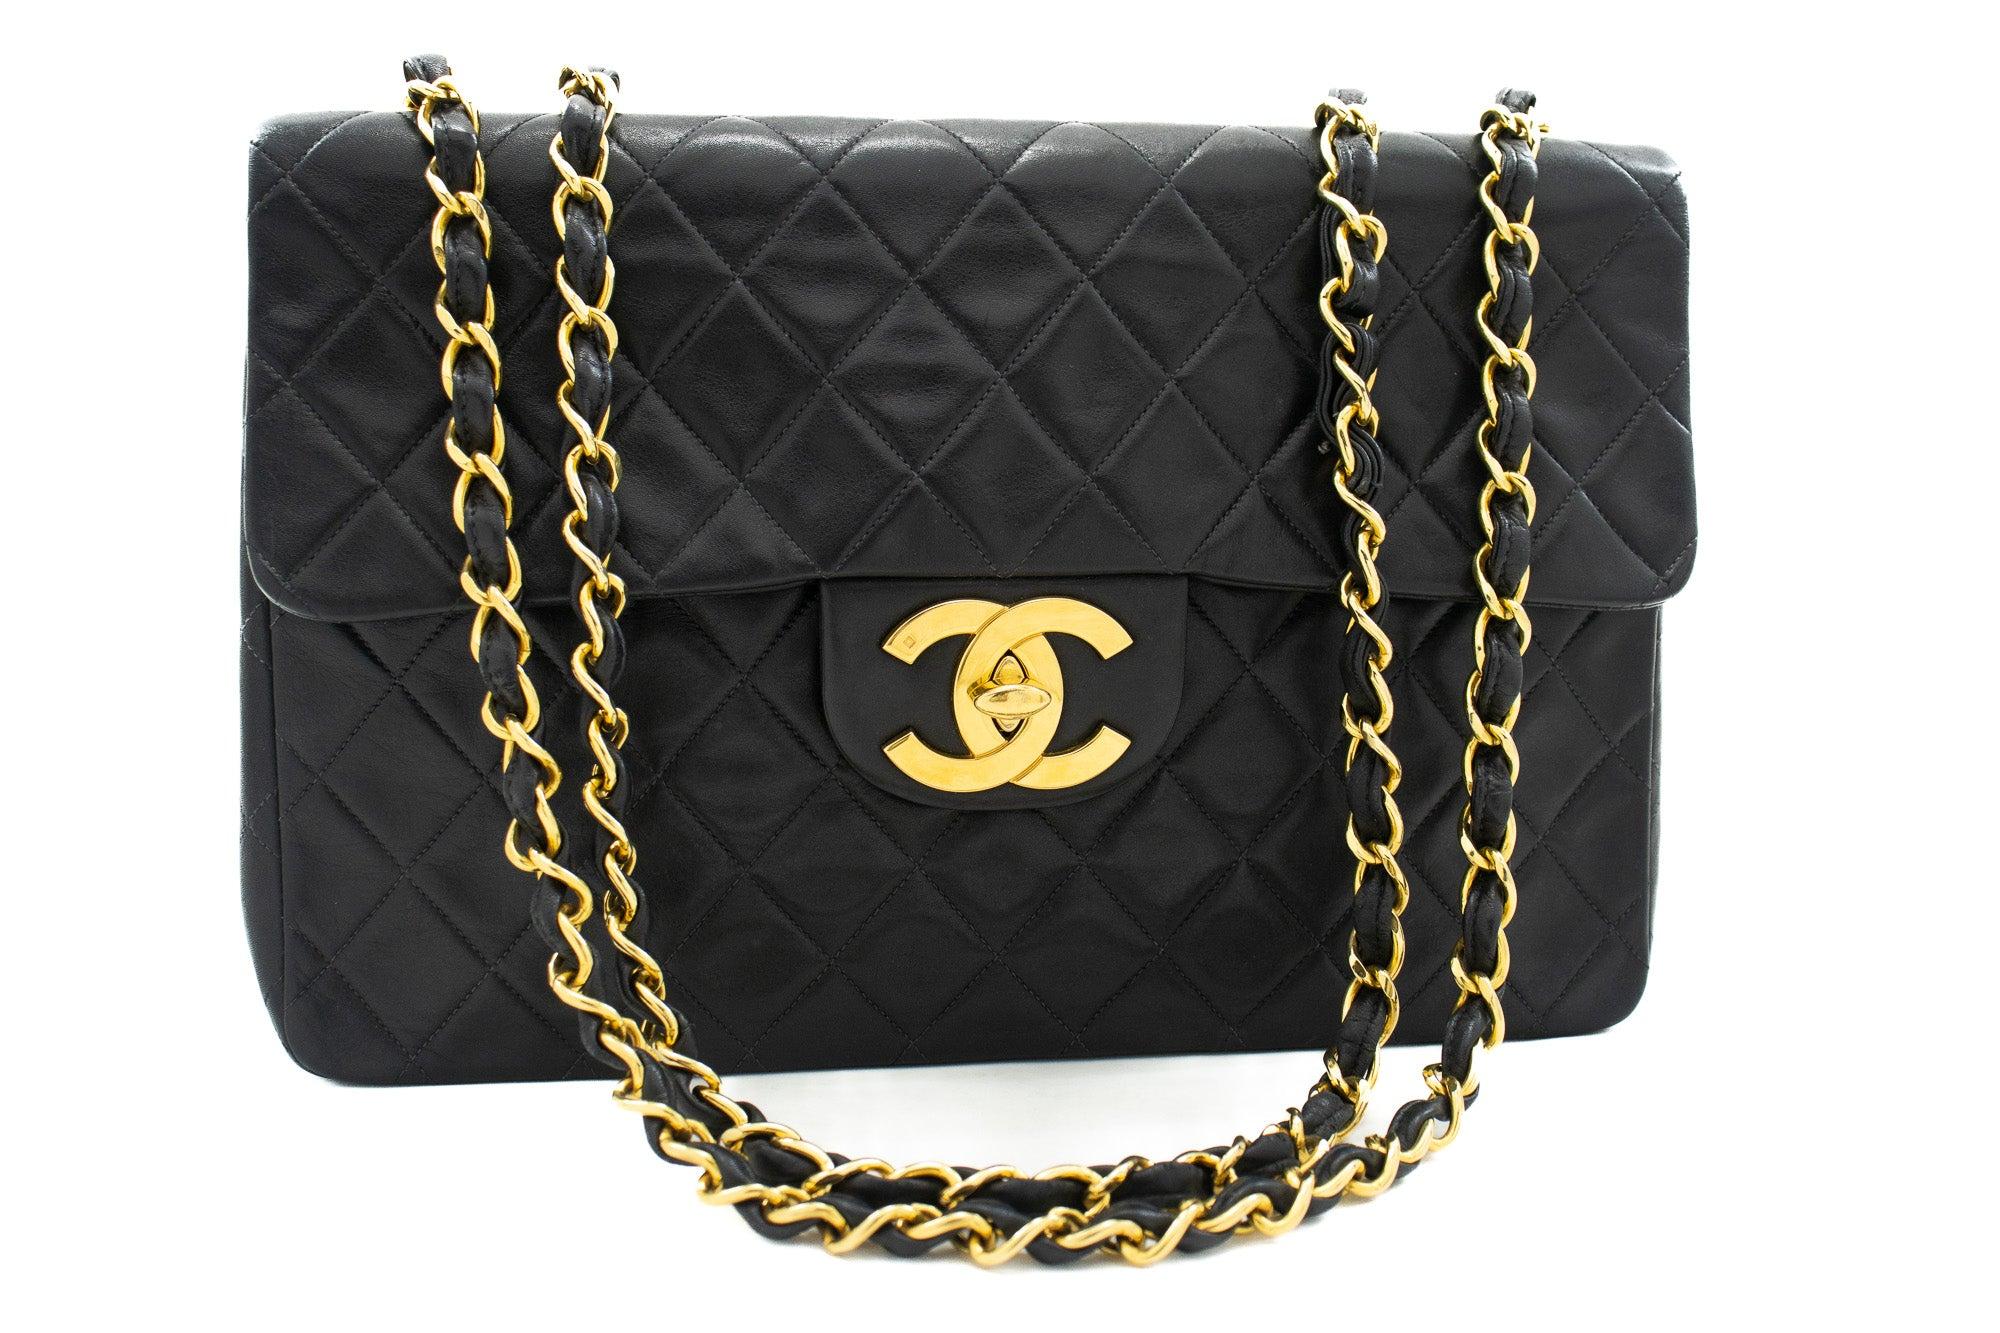 Chanel Timeless/classique Leather Shoulder Bag (pre-owned) in Black